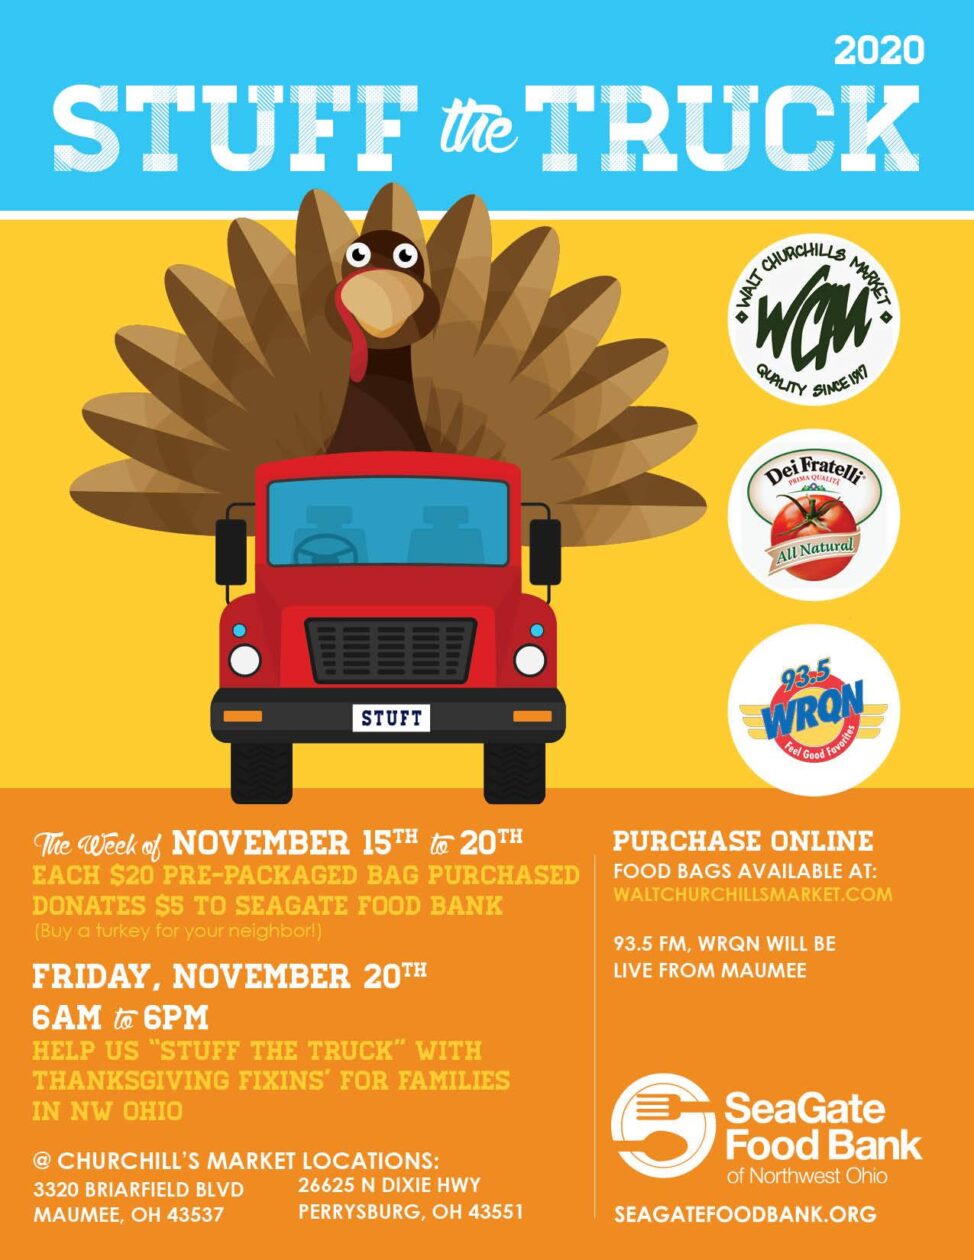 Stuff the Truck is tomorrow!! We will be